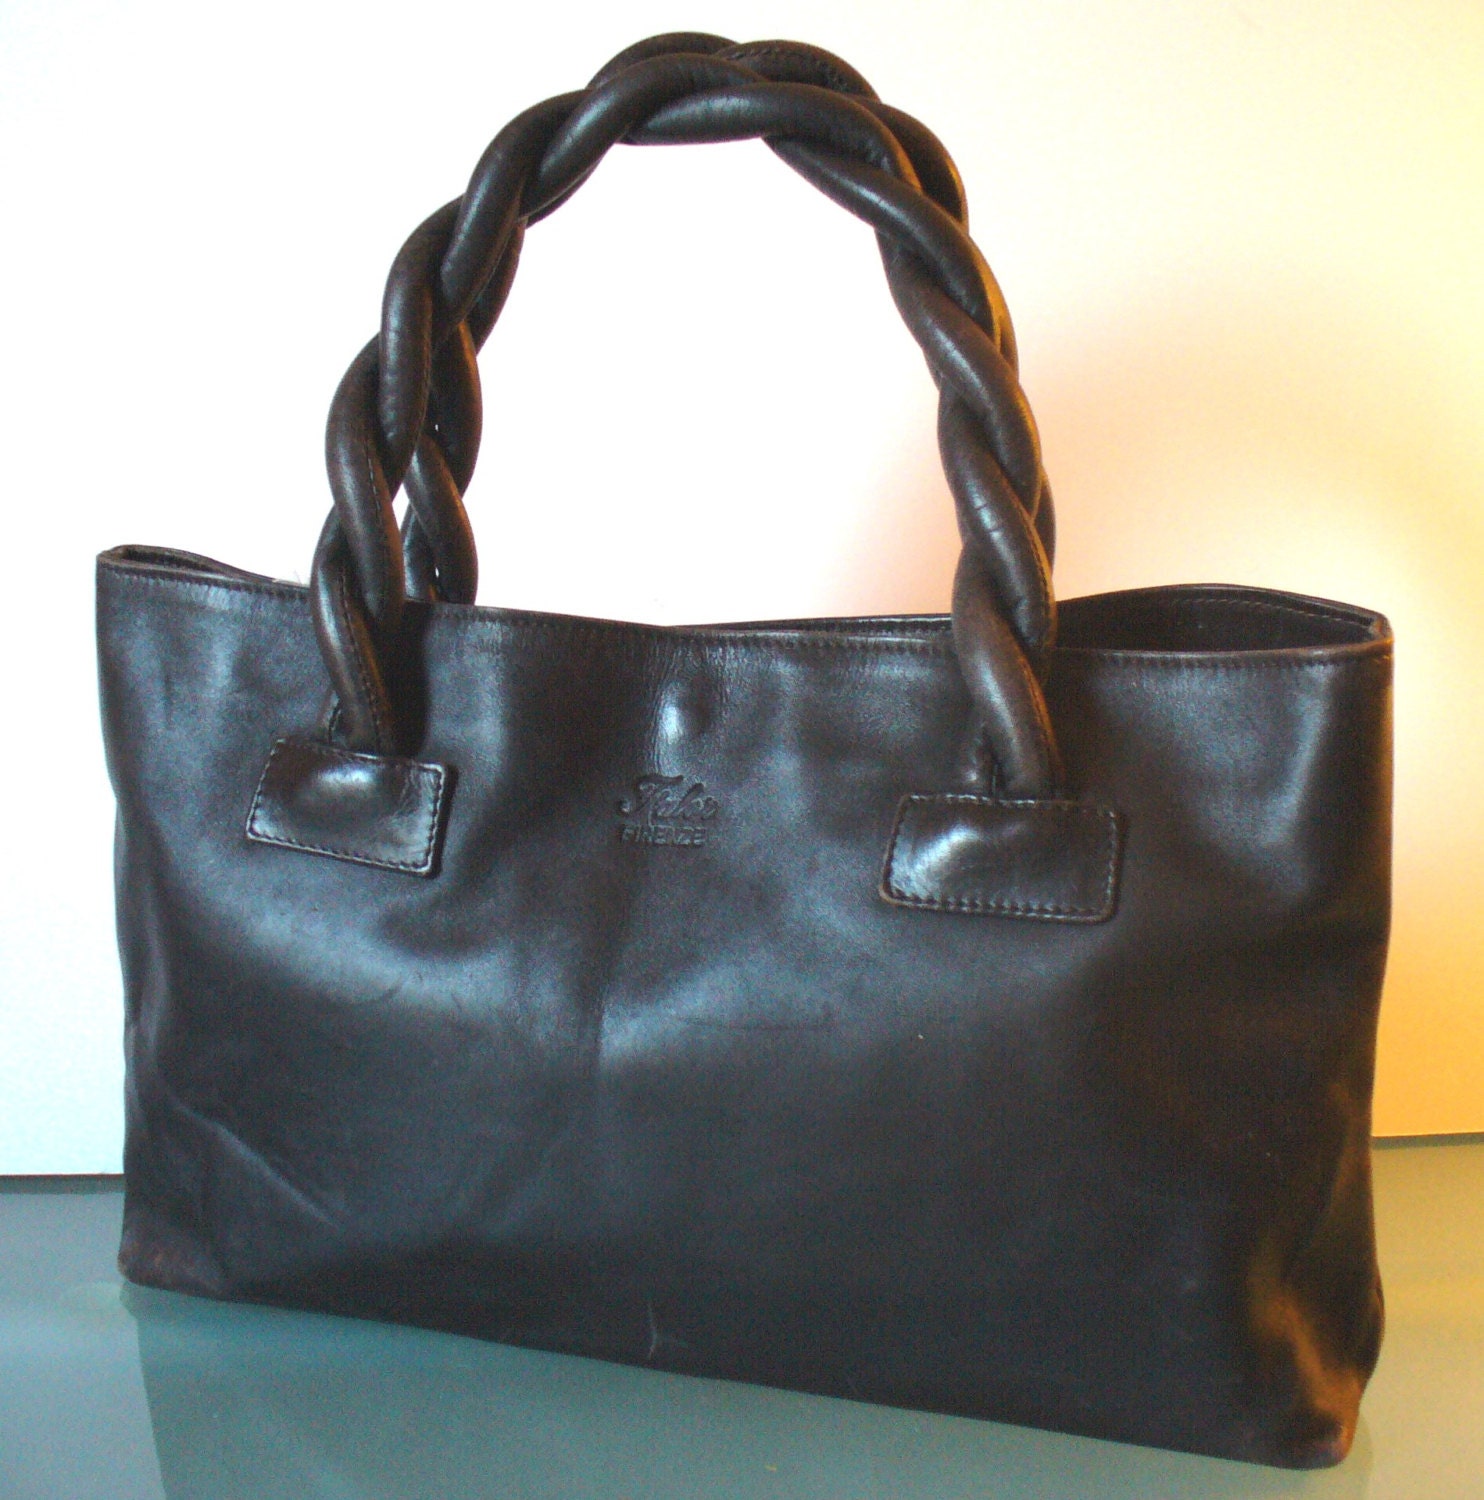 Items similar to Falor Firenze Made in Italy Napa Leather Tote on Etsy